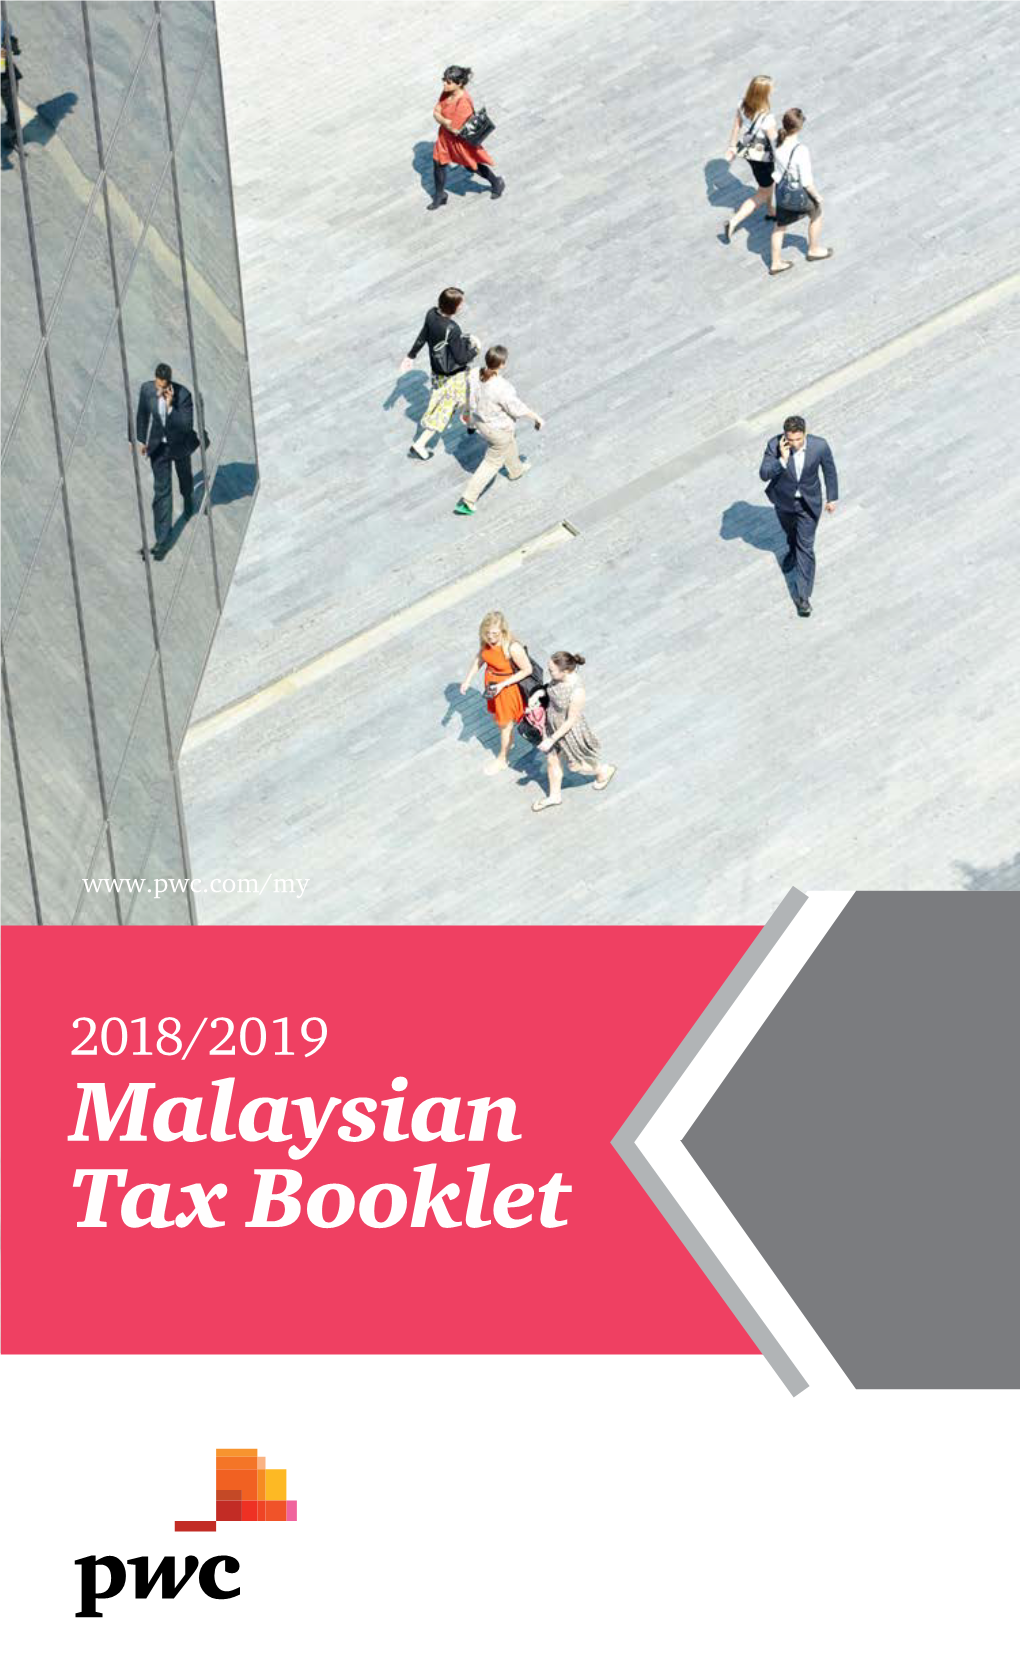 Download 2018/2019 Malaysian Tax Booklet